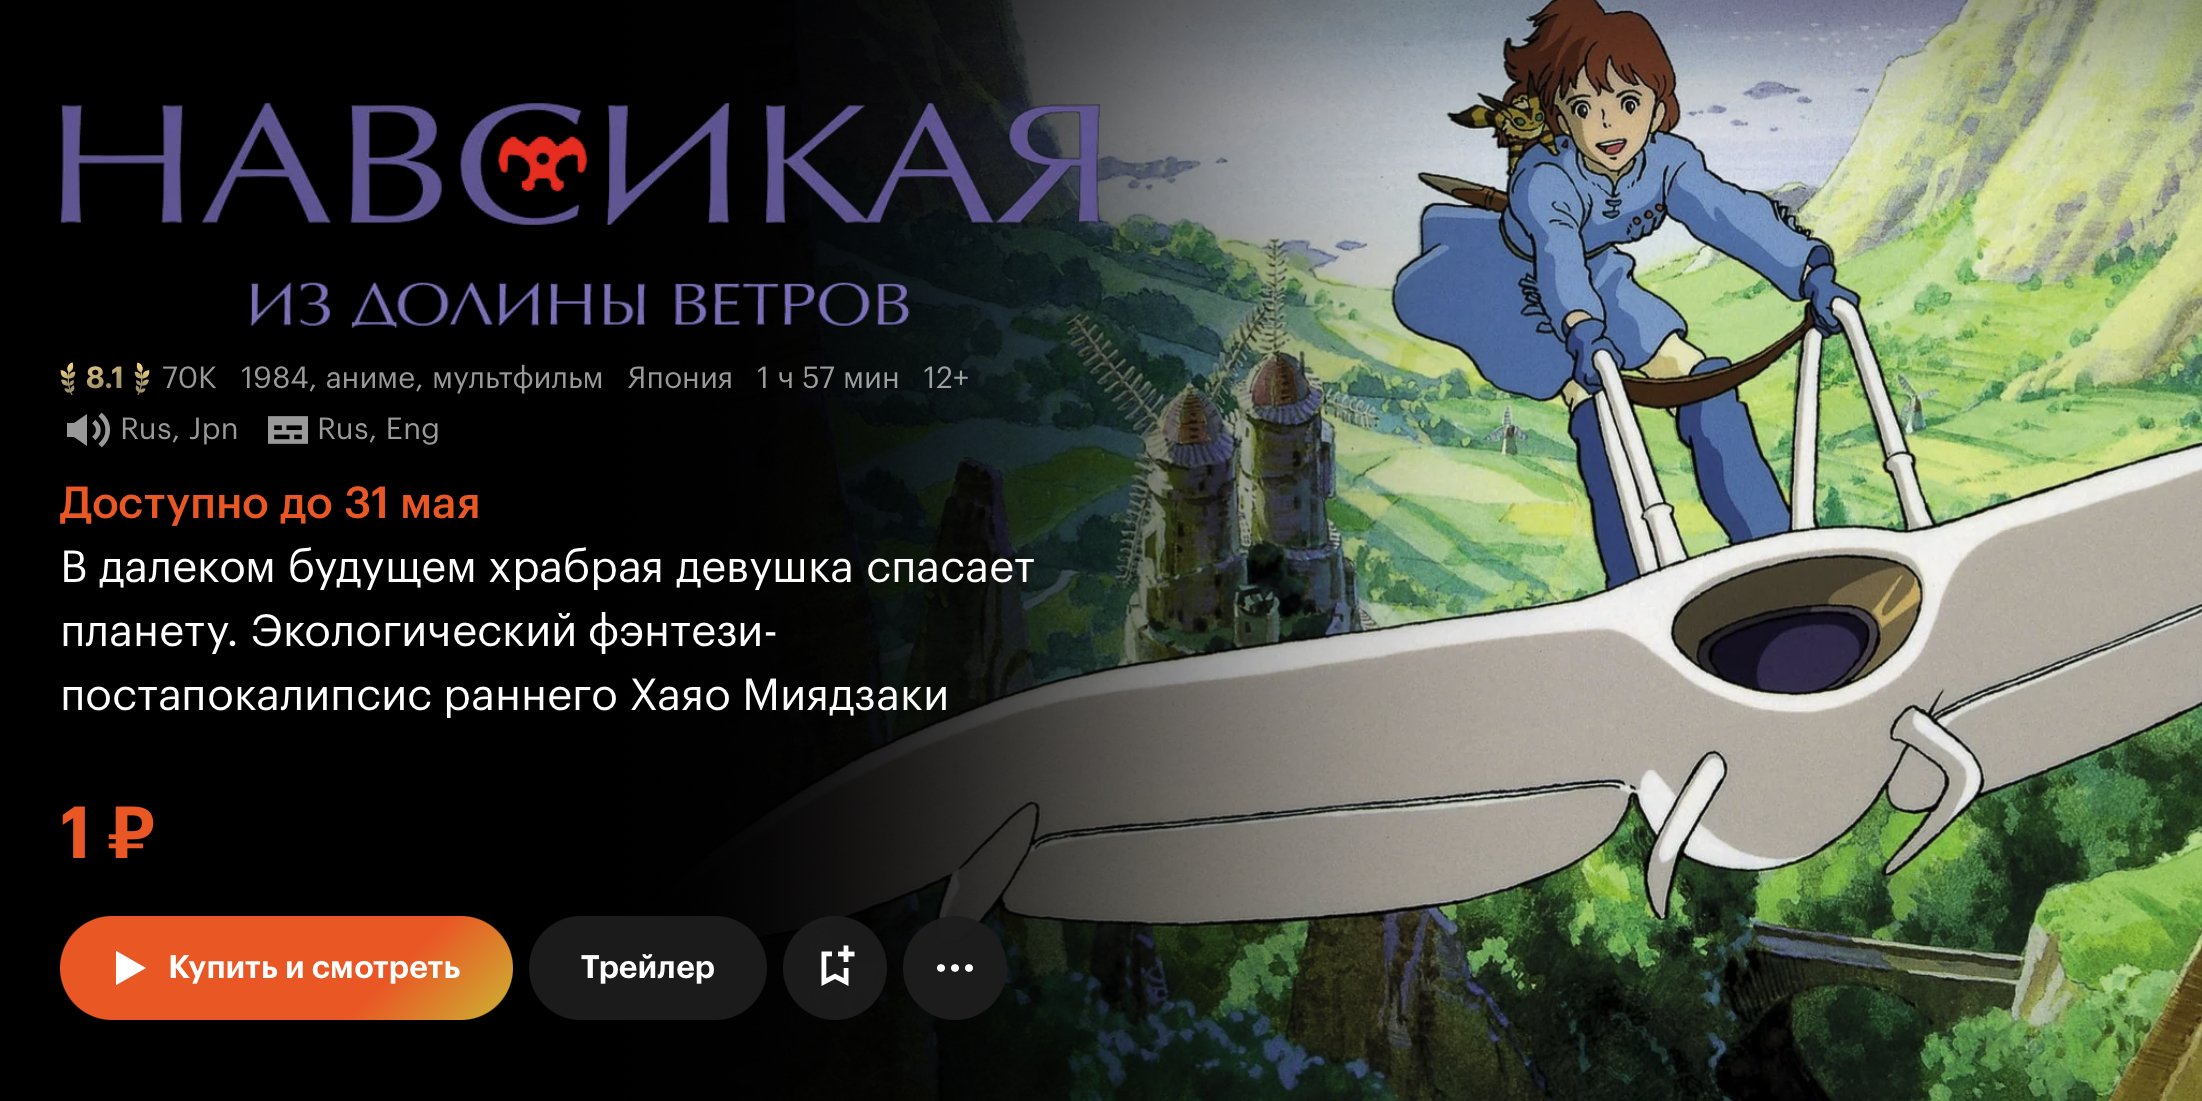 Anime by the ruble: Kinopoisk distributes full-length films of studio Ghibli almost for nothing